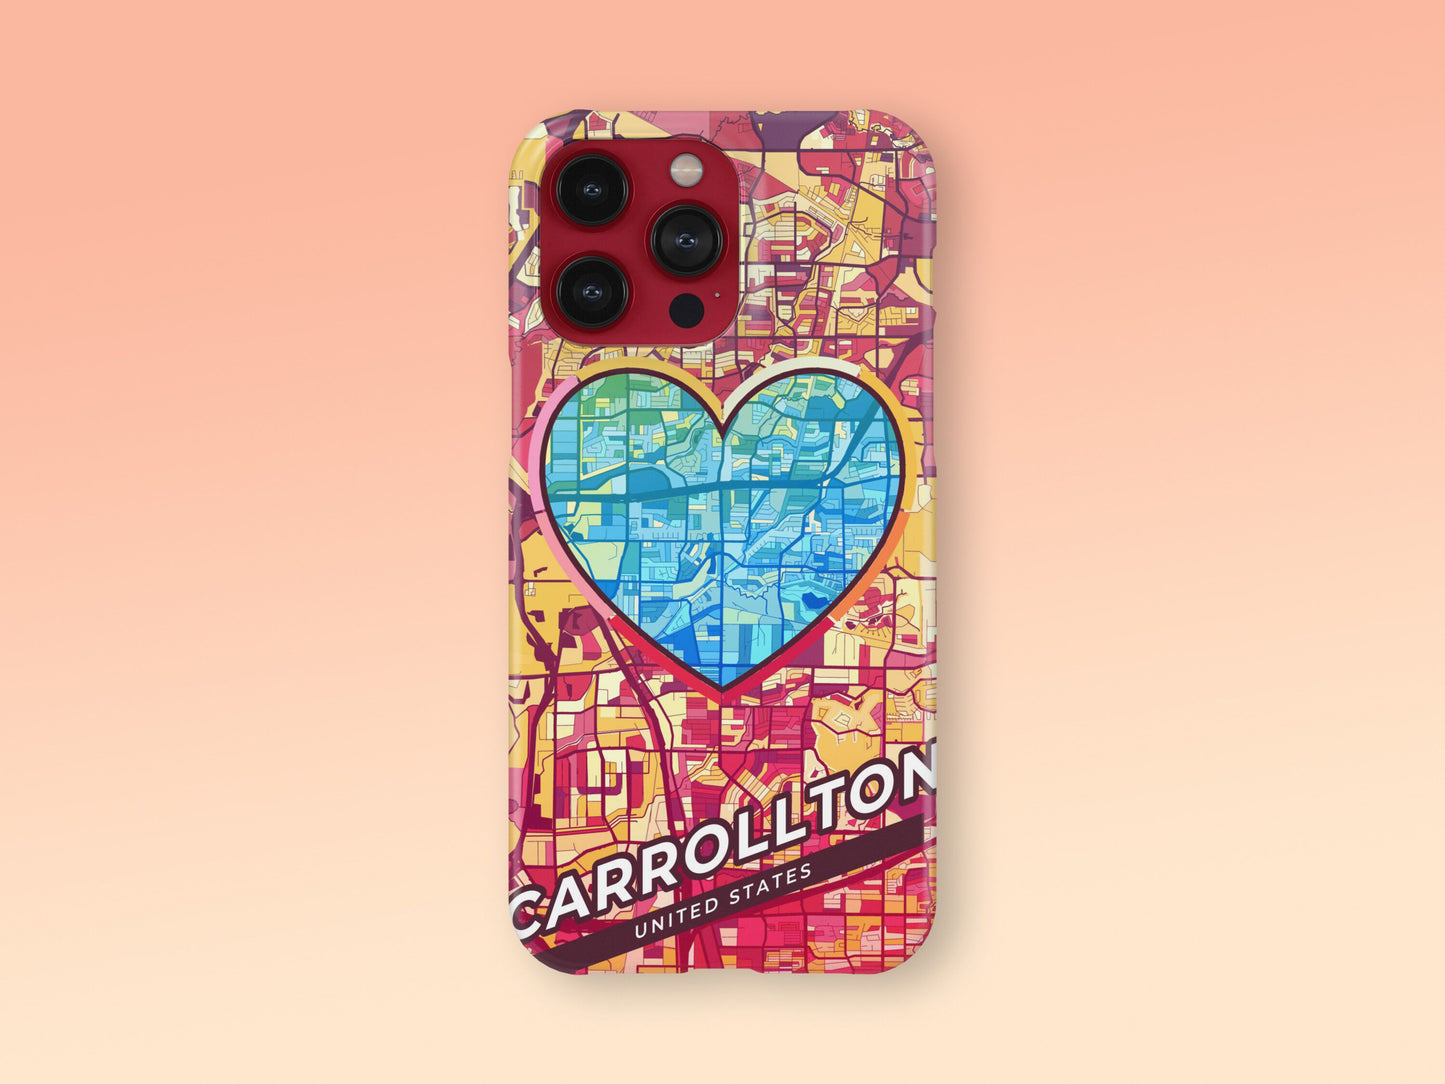 Carrollton Texas slim phone case with colorful icon. Birthday, wedding or housewarming gift. Couple match cases. 2